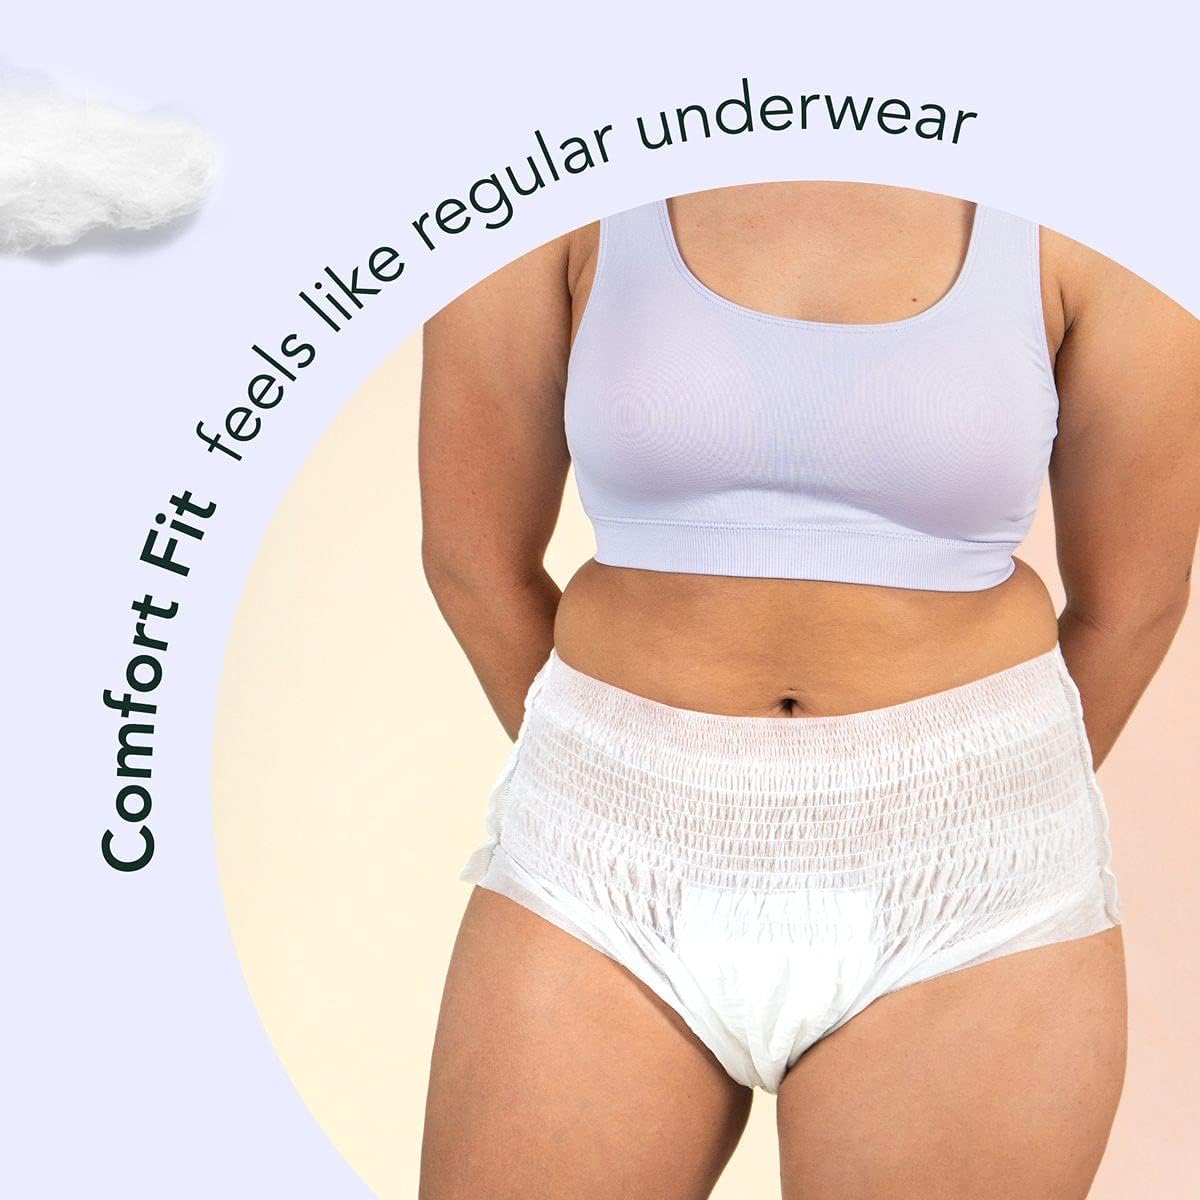 Disposable Underwear for Women, Organic Cotton Cover - Incontinence Pads, Postpartum Essentials, Disposable Underwear, Unscented, Maximum Coverage (Size S-M, 10 Count)